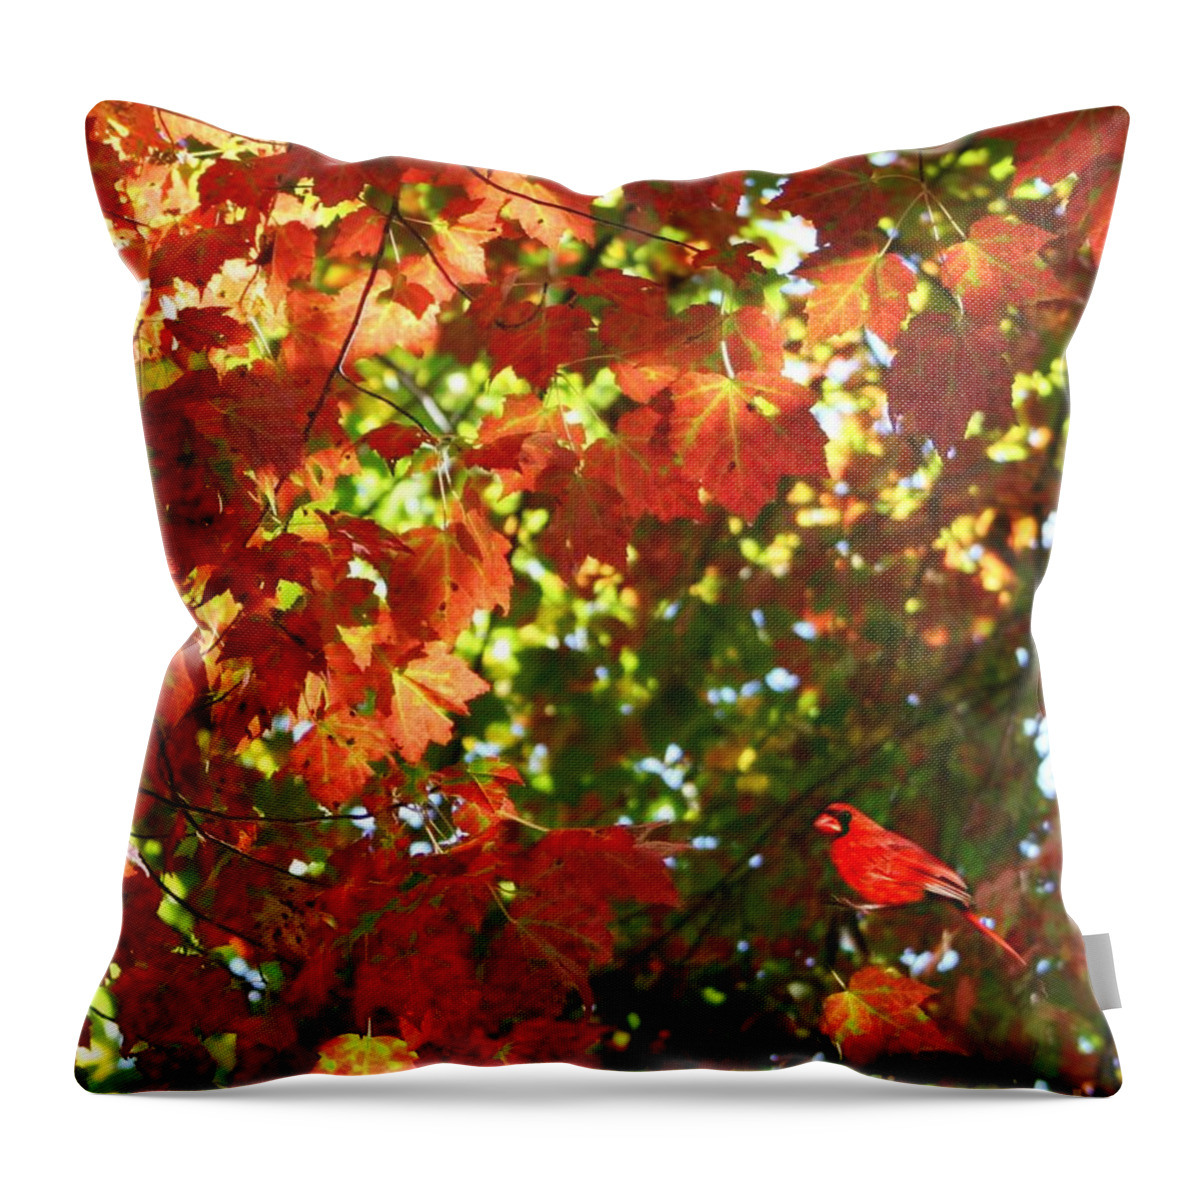 Autumn Throw Pillow featuring the photograph Surrounded By Fall In NE by Barbara S Nickerson